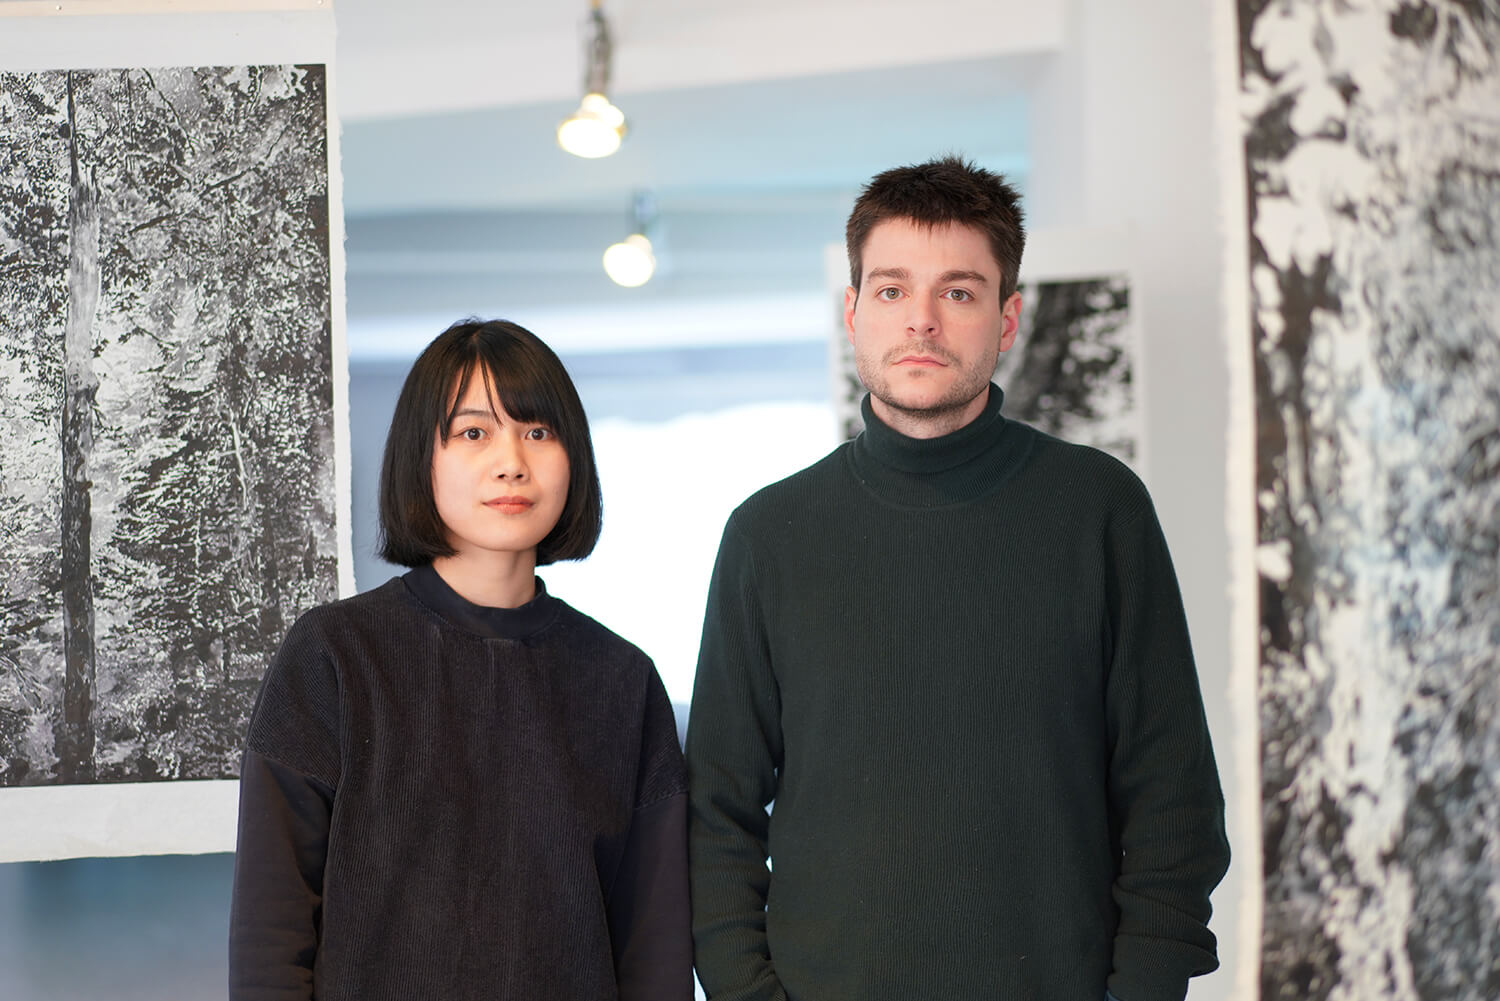 Paul Hommage and Yumi Takeuchi